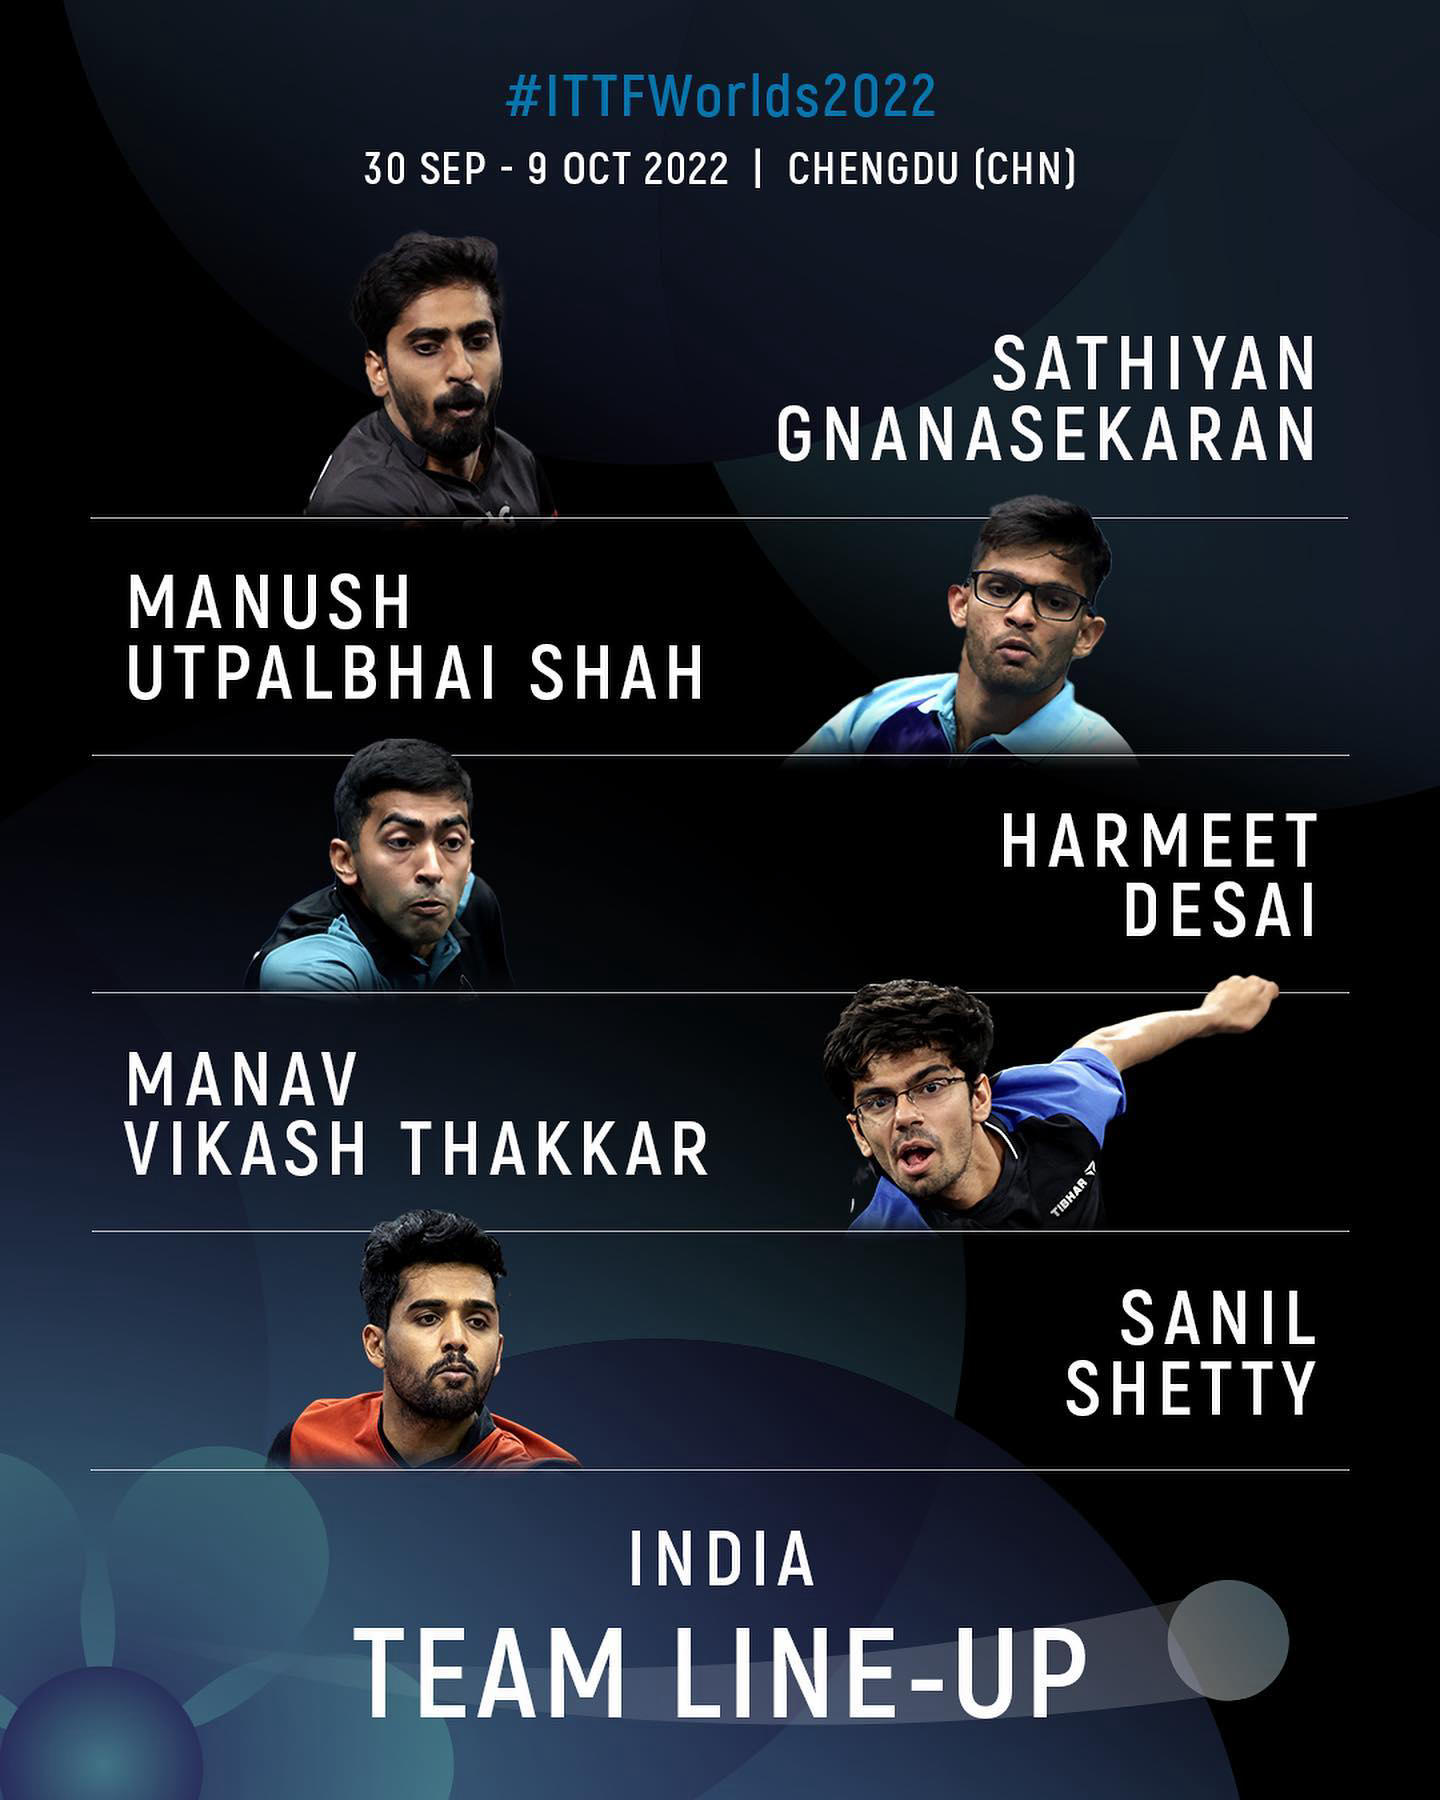 image  1 World Table Tennis - Presenting #TeamIndia's line-up for #ITTFWorlds2022